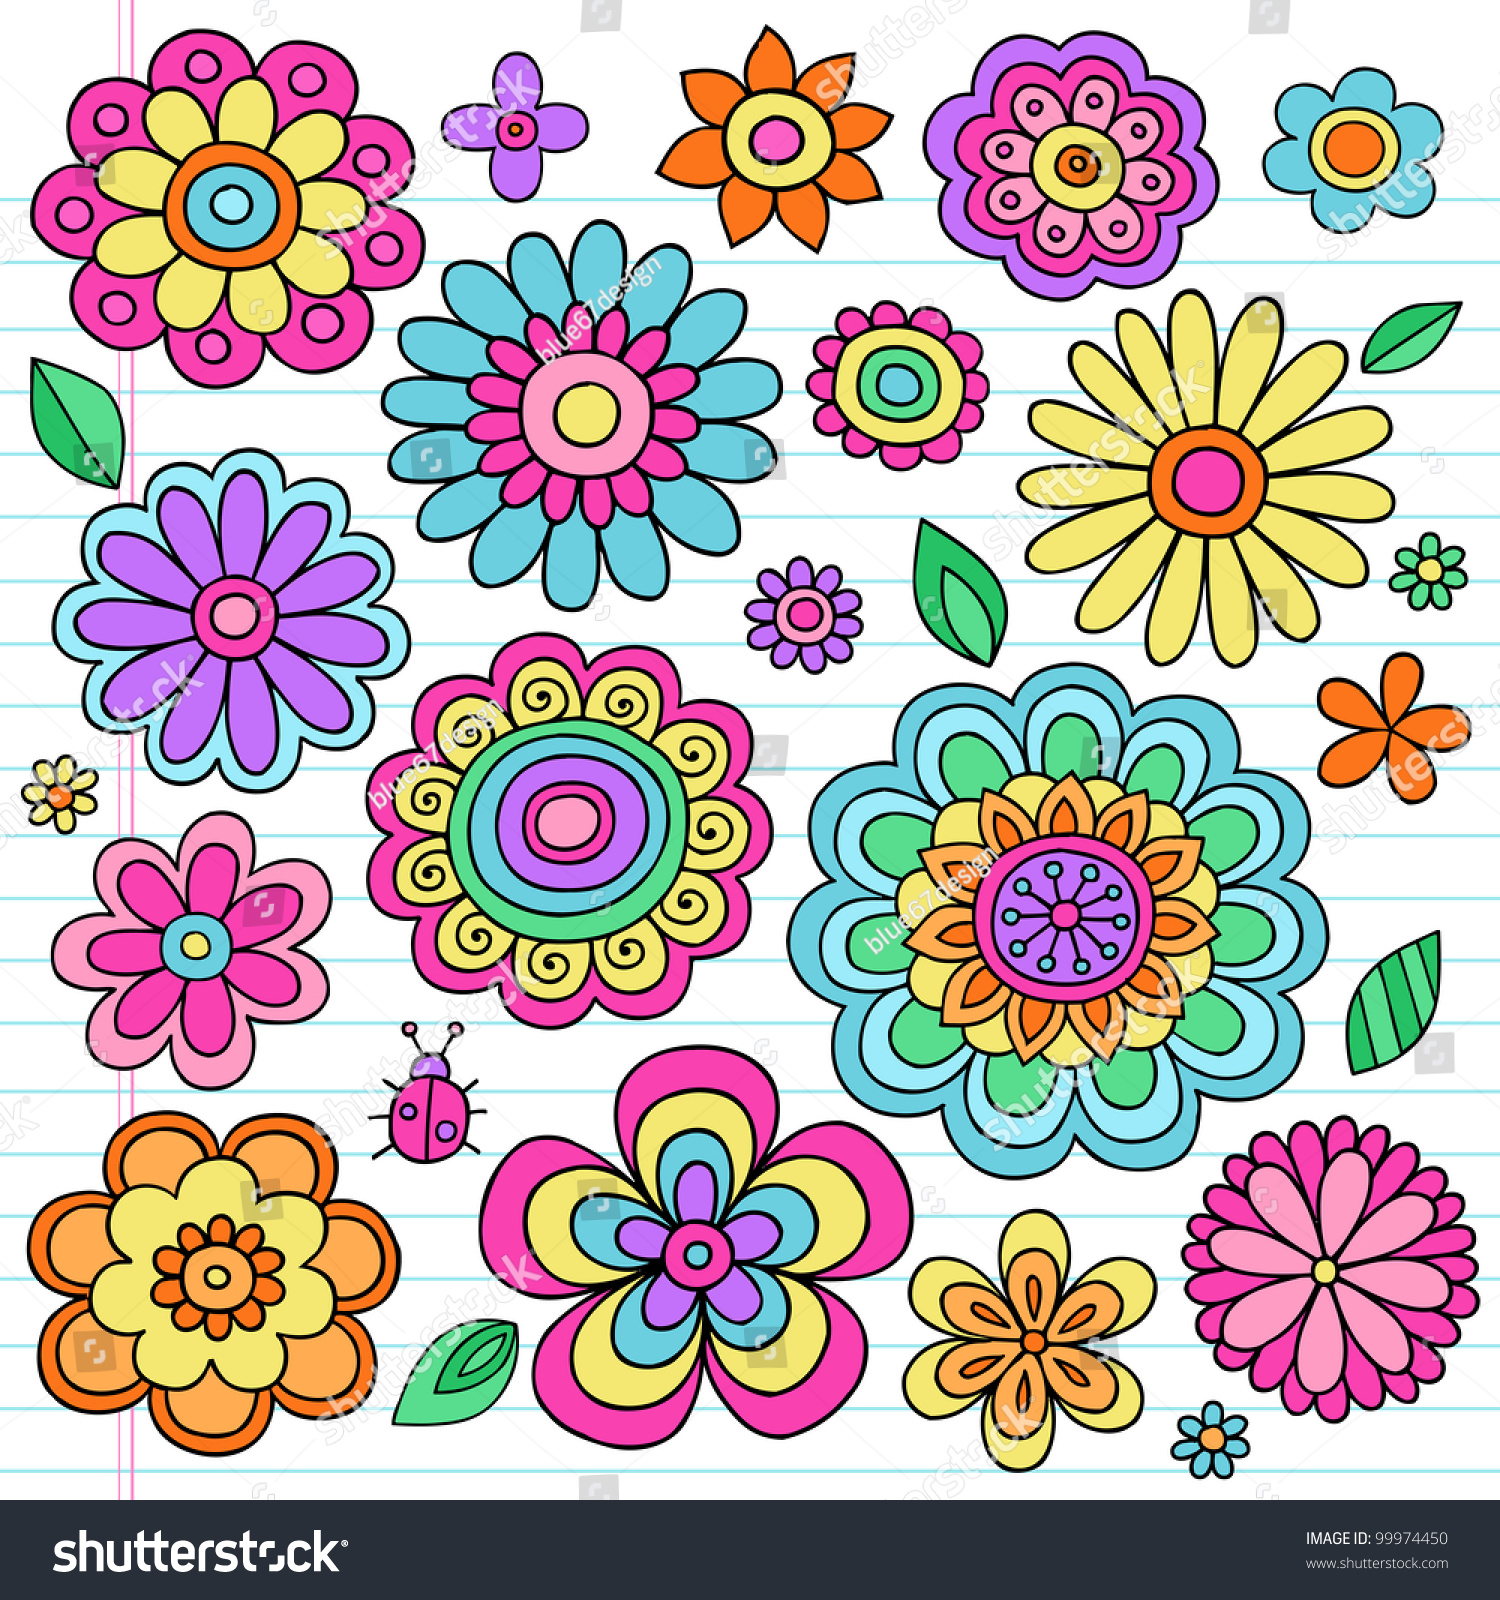 Flower Power Flowers Ladybug Groovy Psychedelic Stock Vector (Royalty Free)...